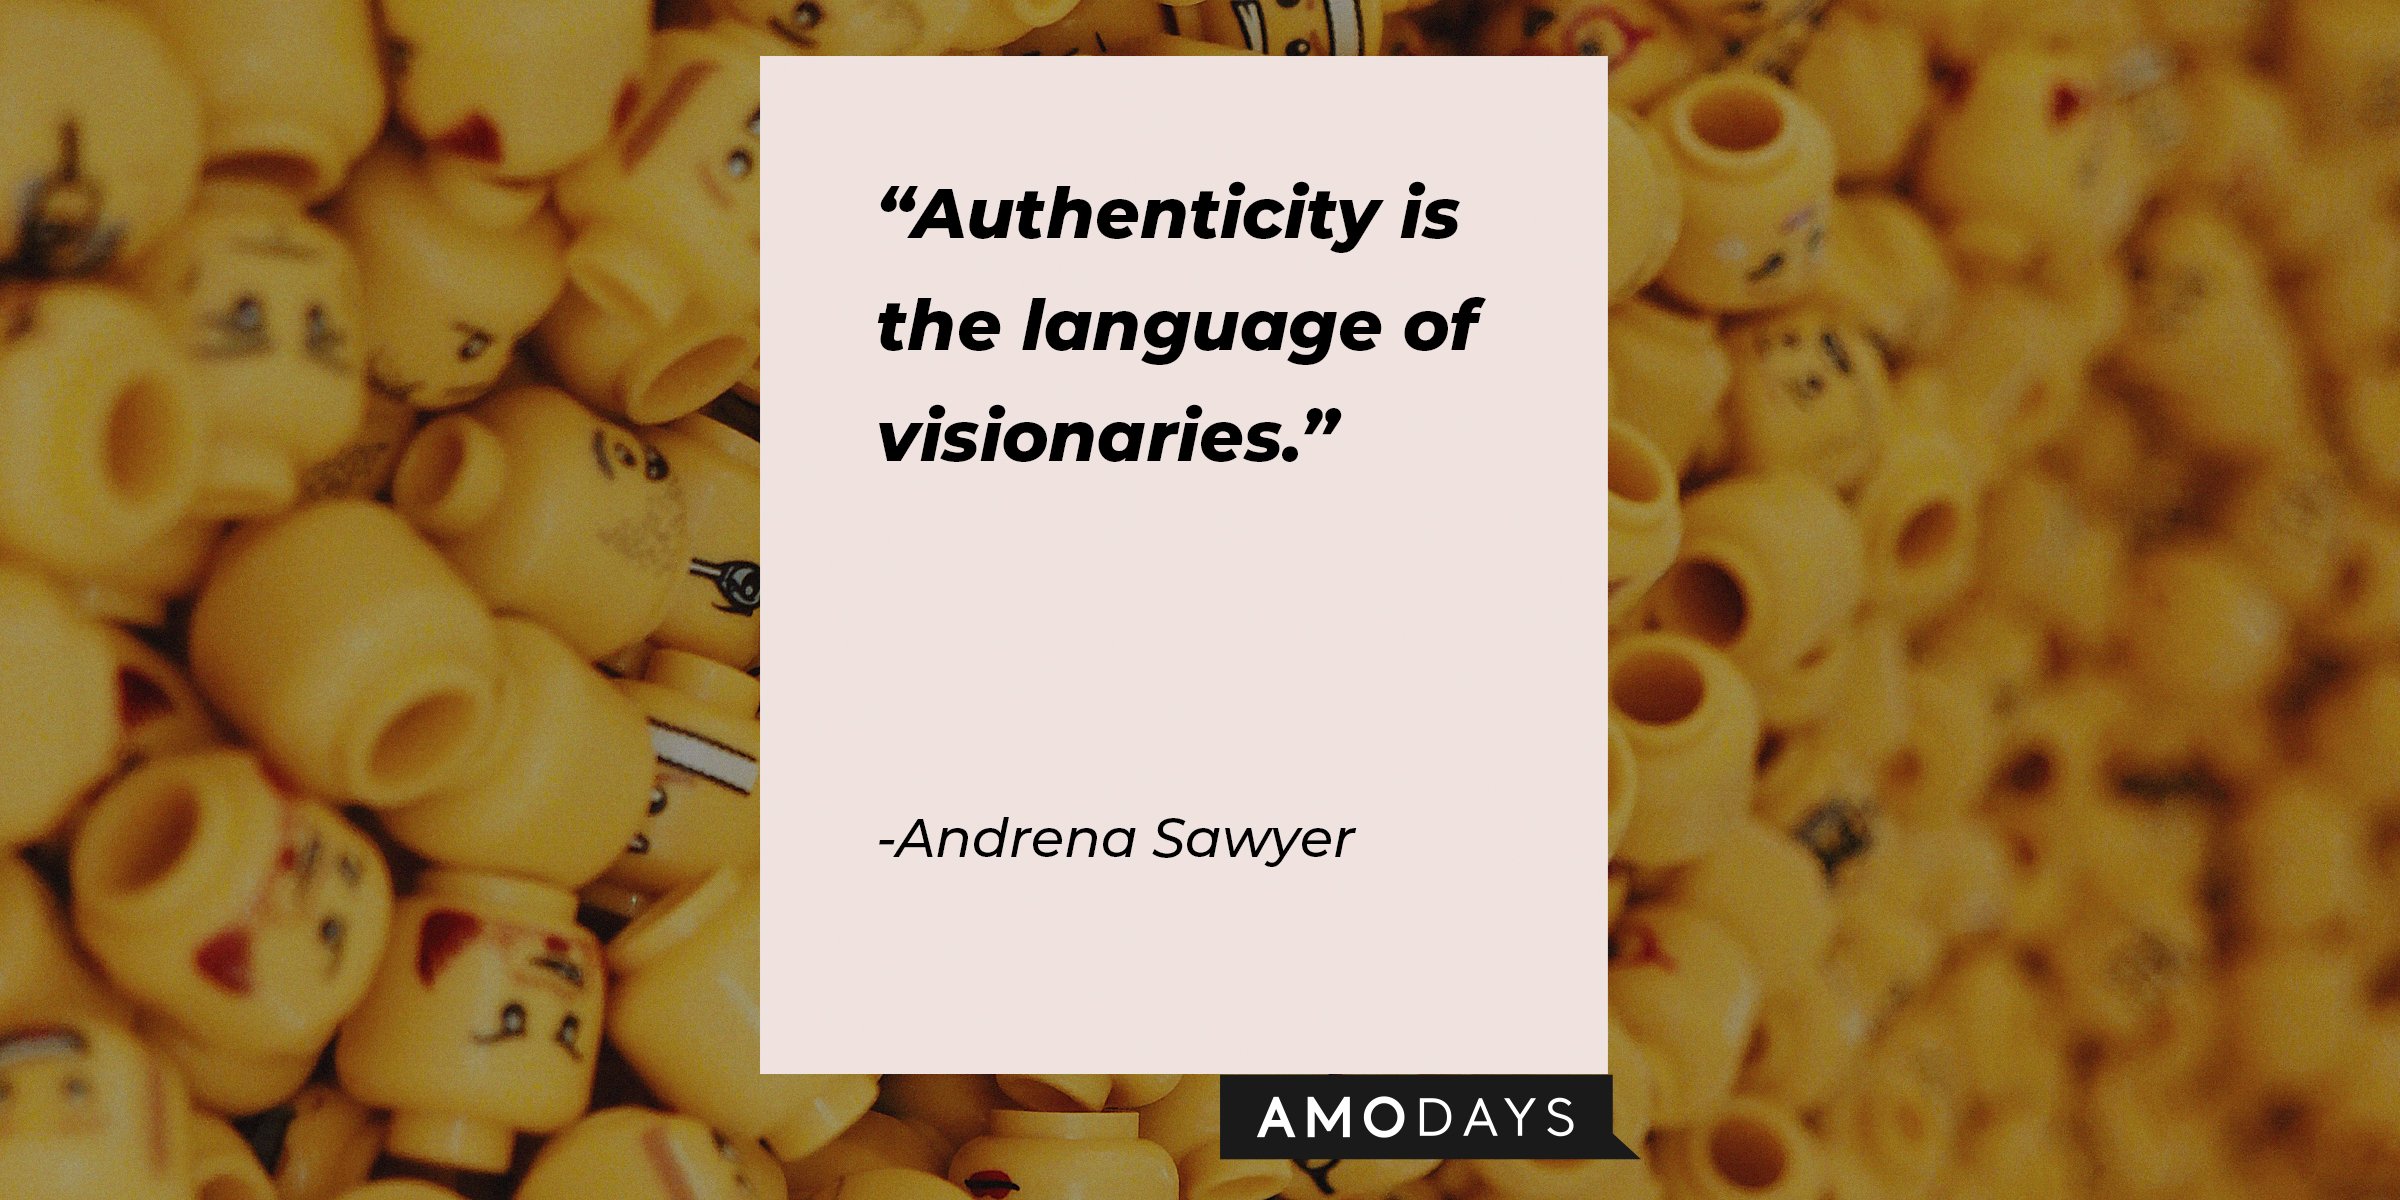 Unsplash | Lego heads with the quote, "Authenticity is the language of visionaries" by Adrena Sawyer